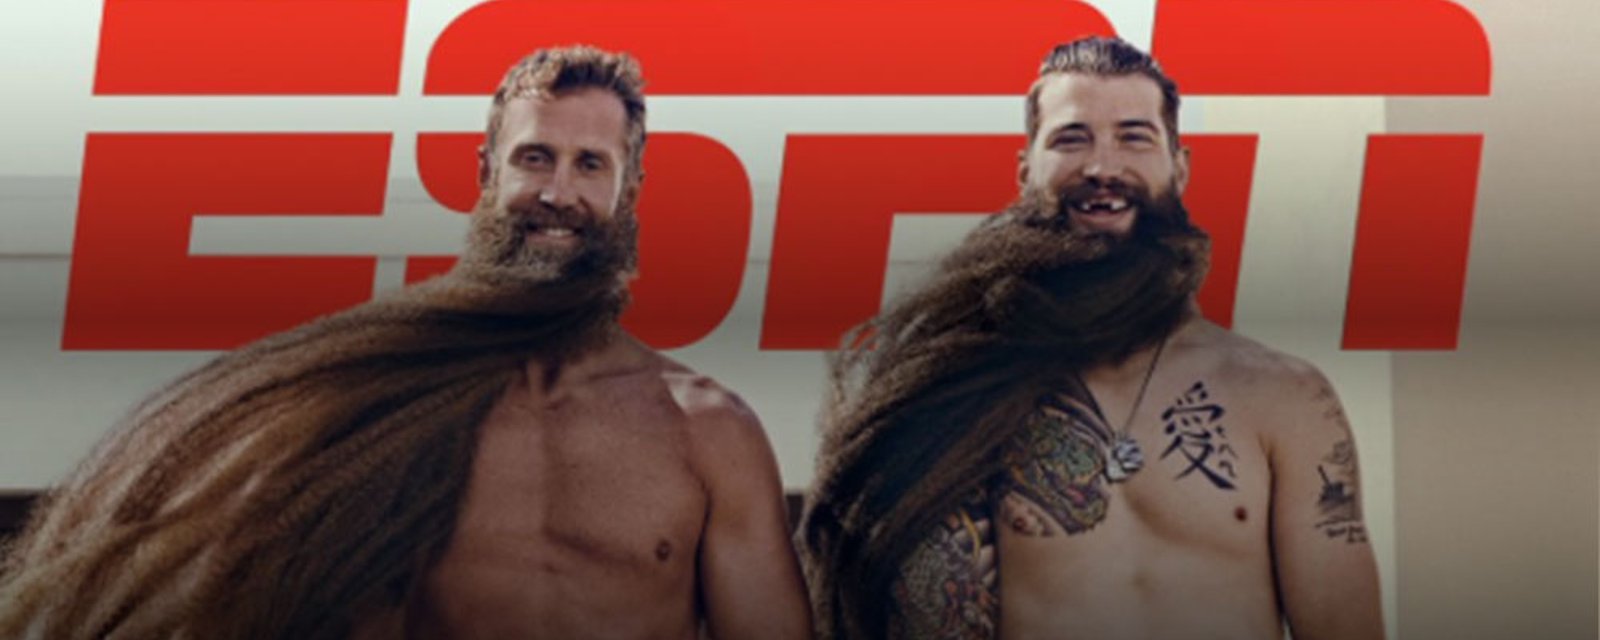 Gotta See It: The revealing cover for Thornton’s and Burns’ ESPN Body Issue